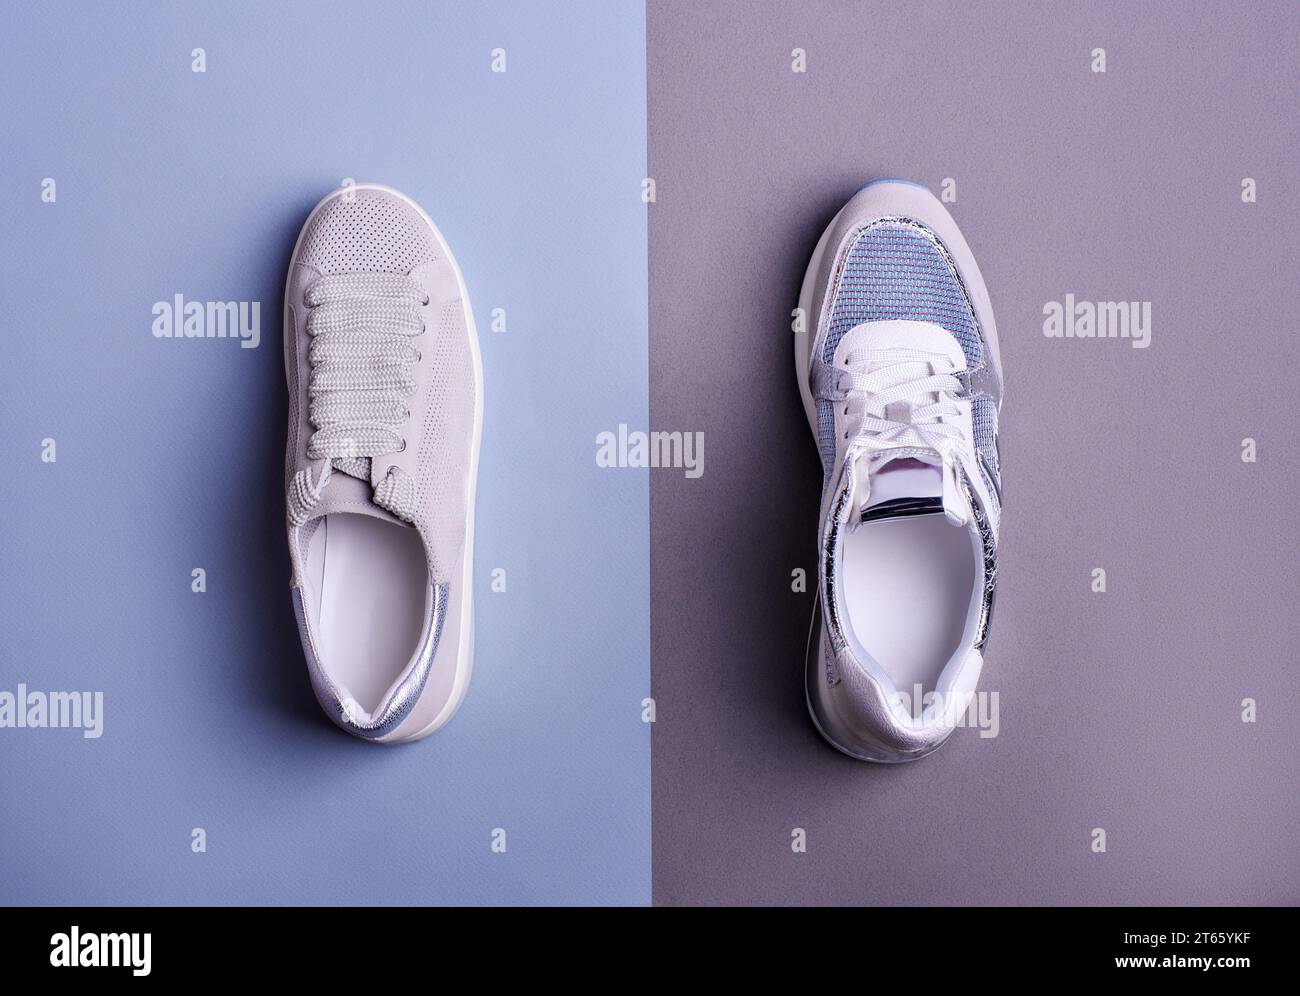 Top view of two stylish different sneakers arranged on a two-color background, gray and blue color scheme. Fashionable sports footwear. Creative minim Stock Photo